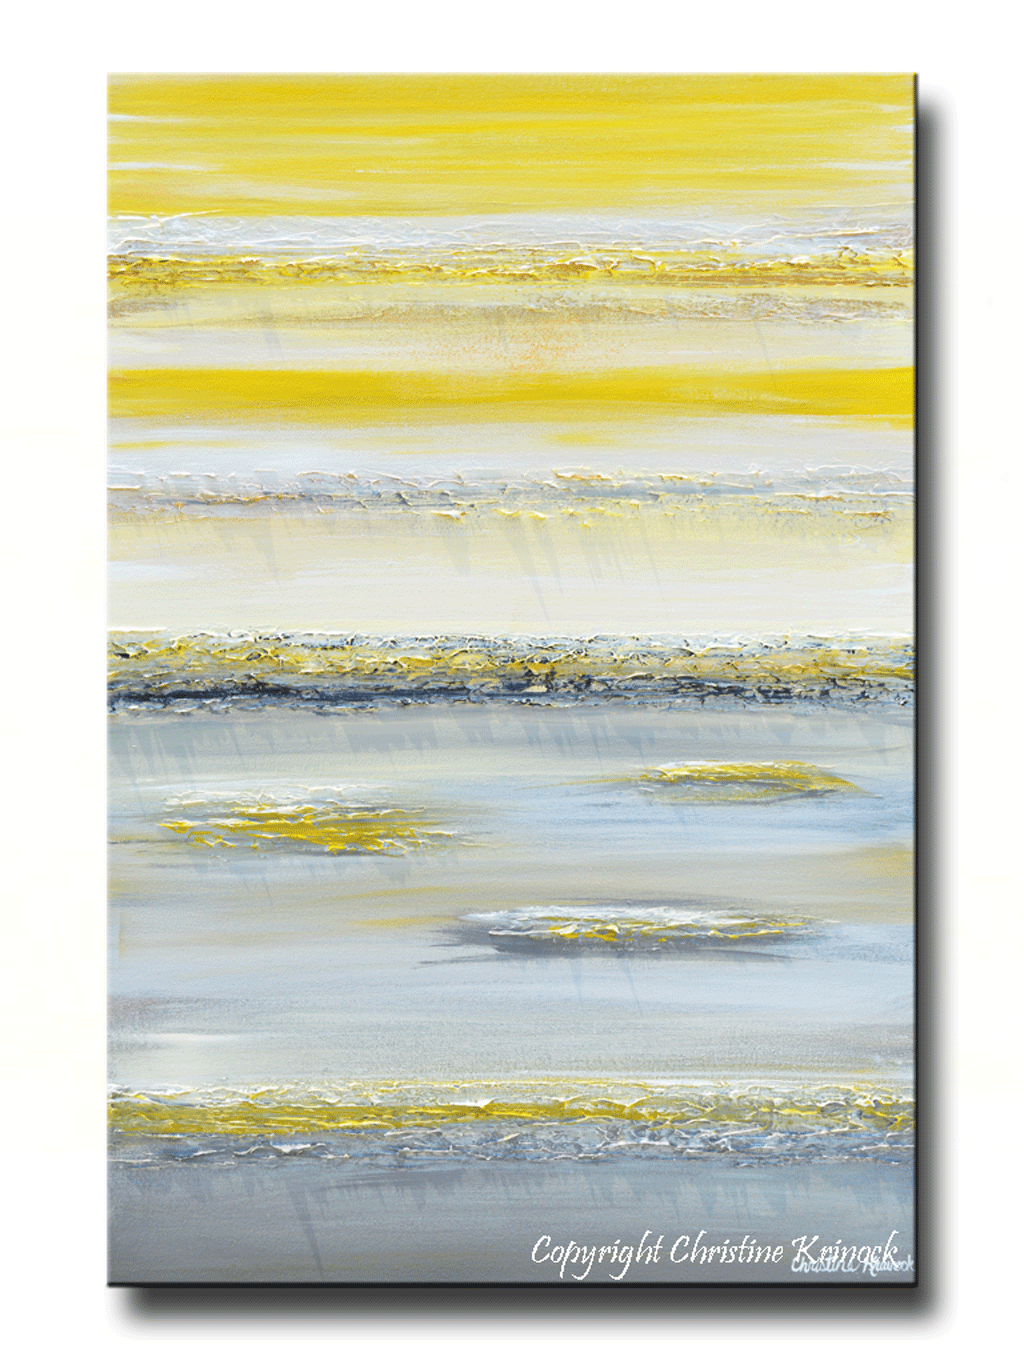 GICLEE PRINT Art White Grey Abstract Painting Modern Neutral Wall Art –  Contemporary Art by Christine